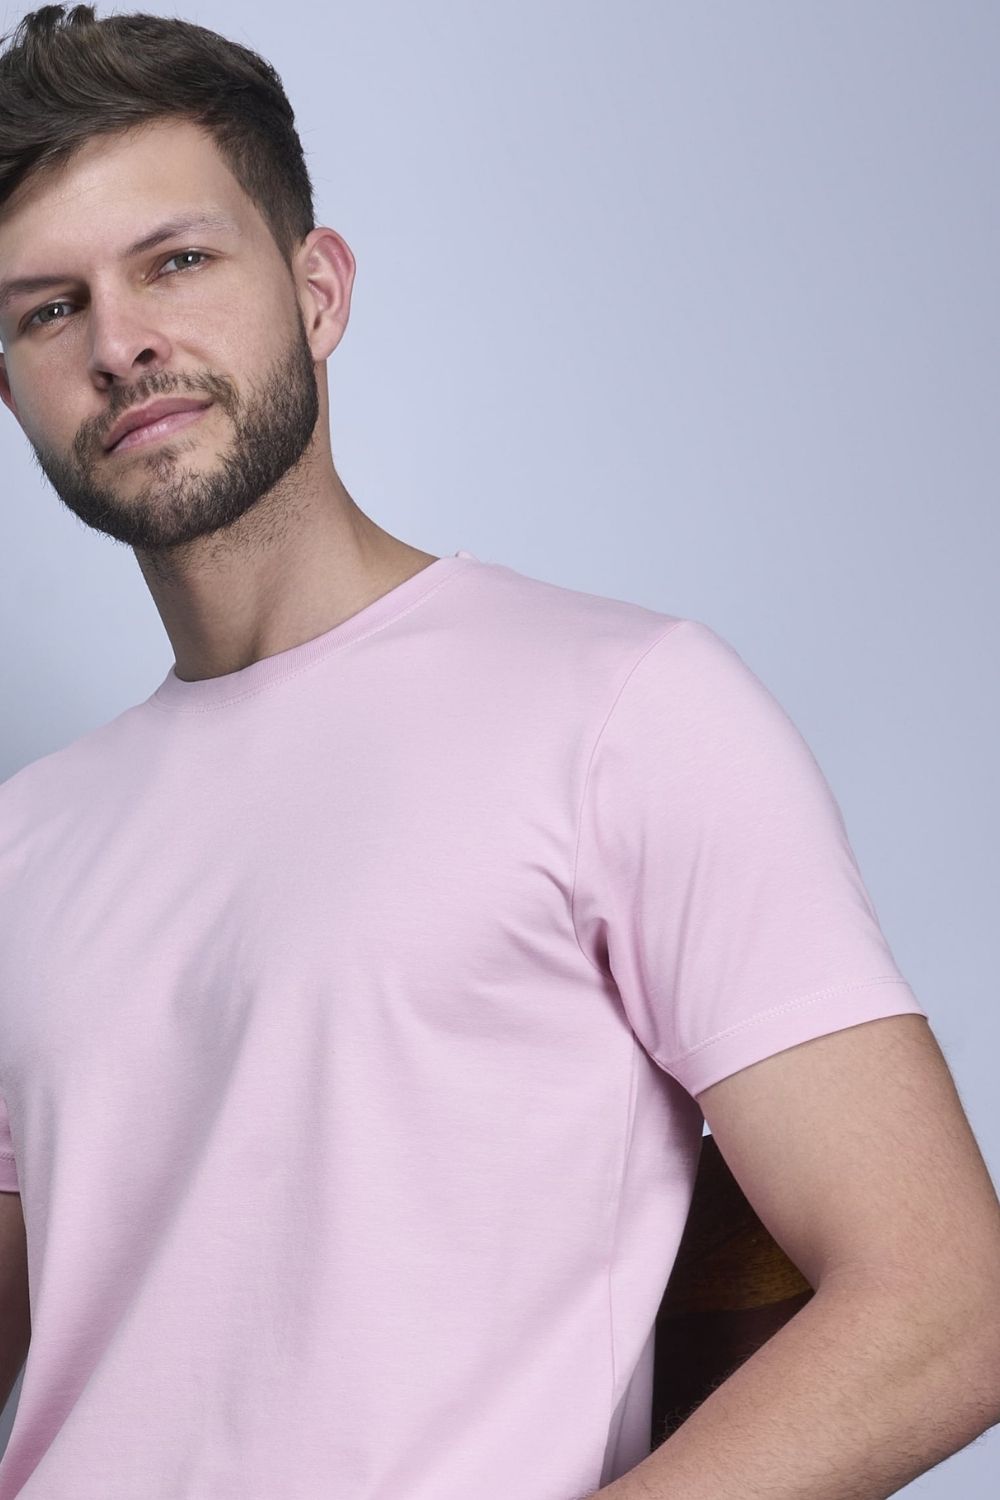 Cotton Stretch T shirt for men in the solid color lilac shade with half sleeves and round neck, side view.